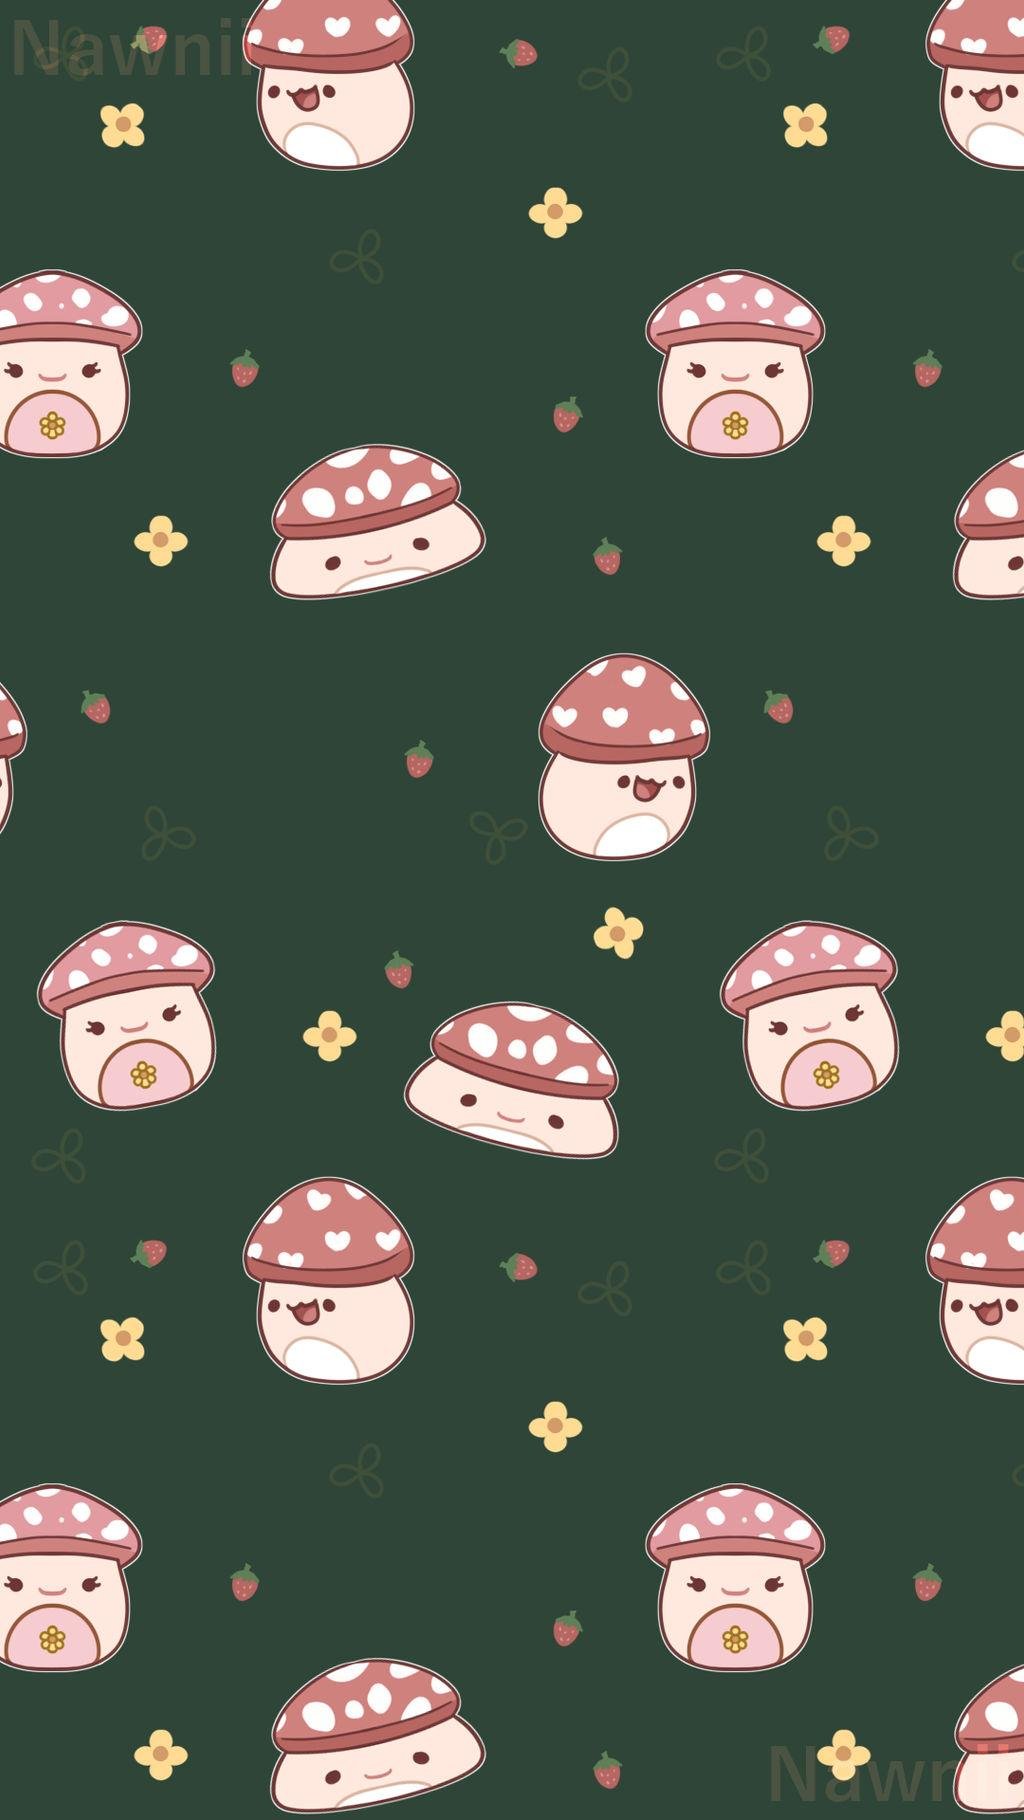 Malcolm Squishmallow Wallpaper by Nawnii on